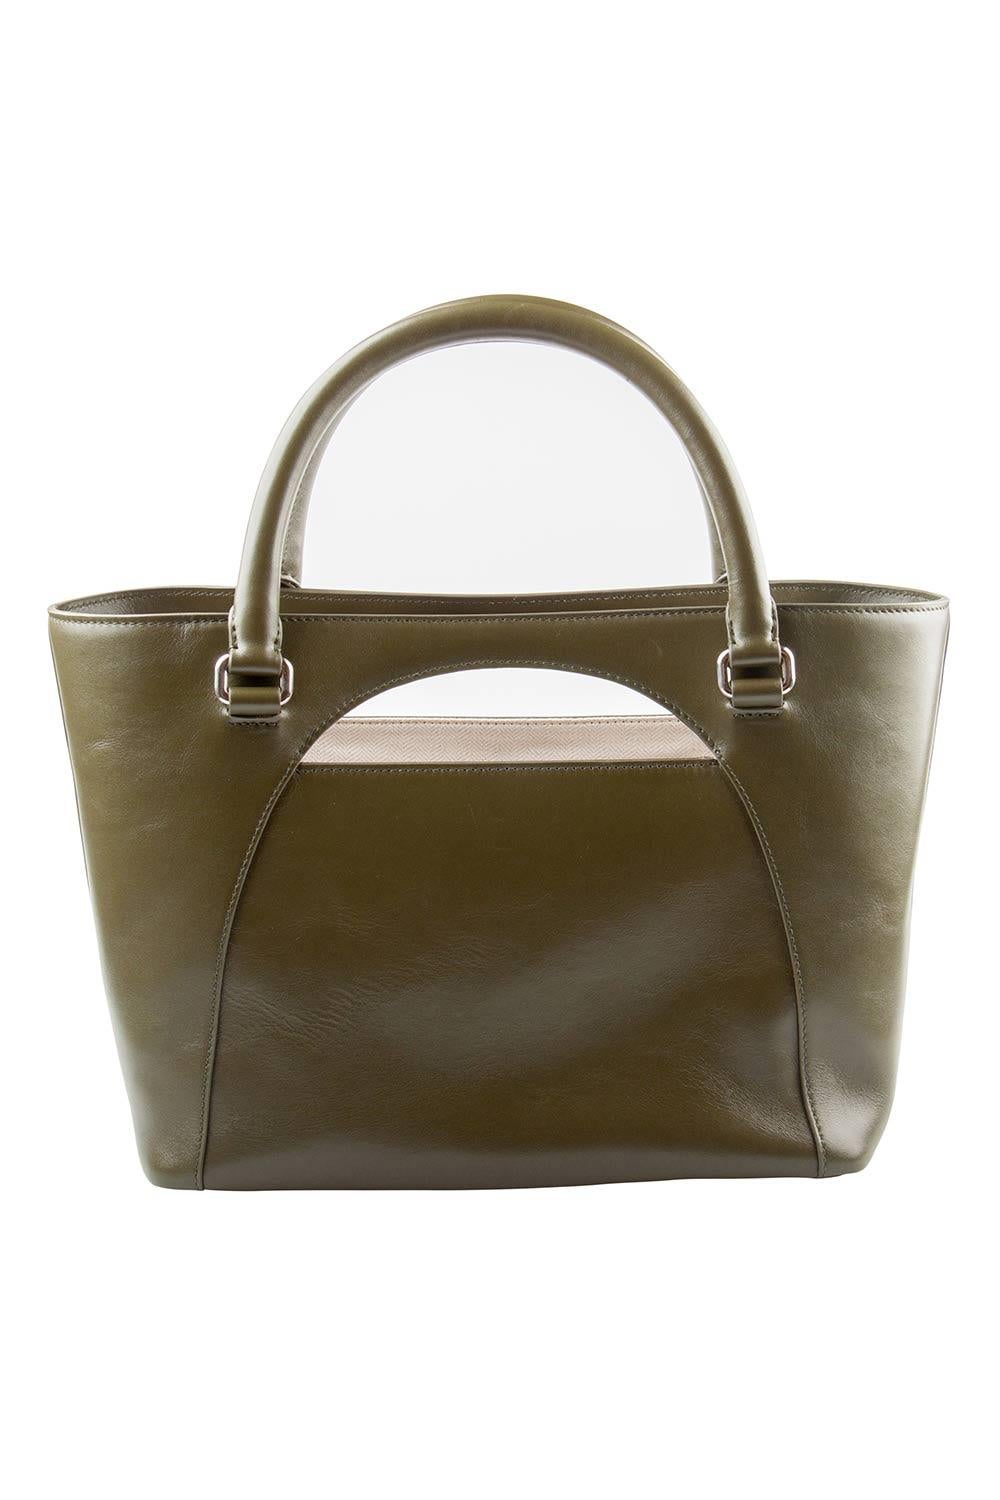 Fall in love with this absolutely stylish tote from J.W Anderson. A classic, chic leather piece to own, this would never disappoint you. Its interior is lined with canvas to ensure that it retains its fantastic look. olive green in color, this